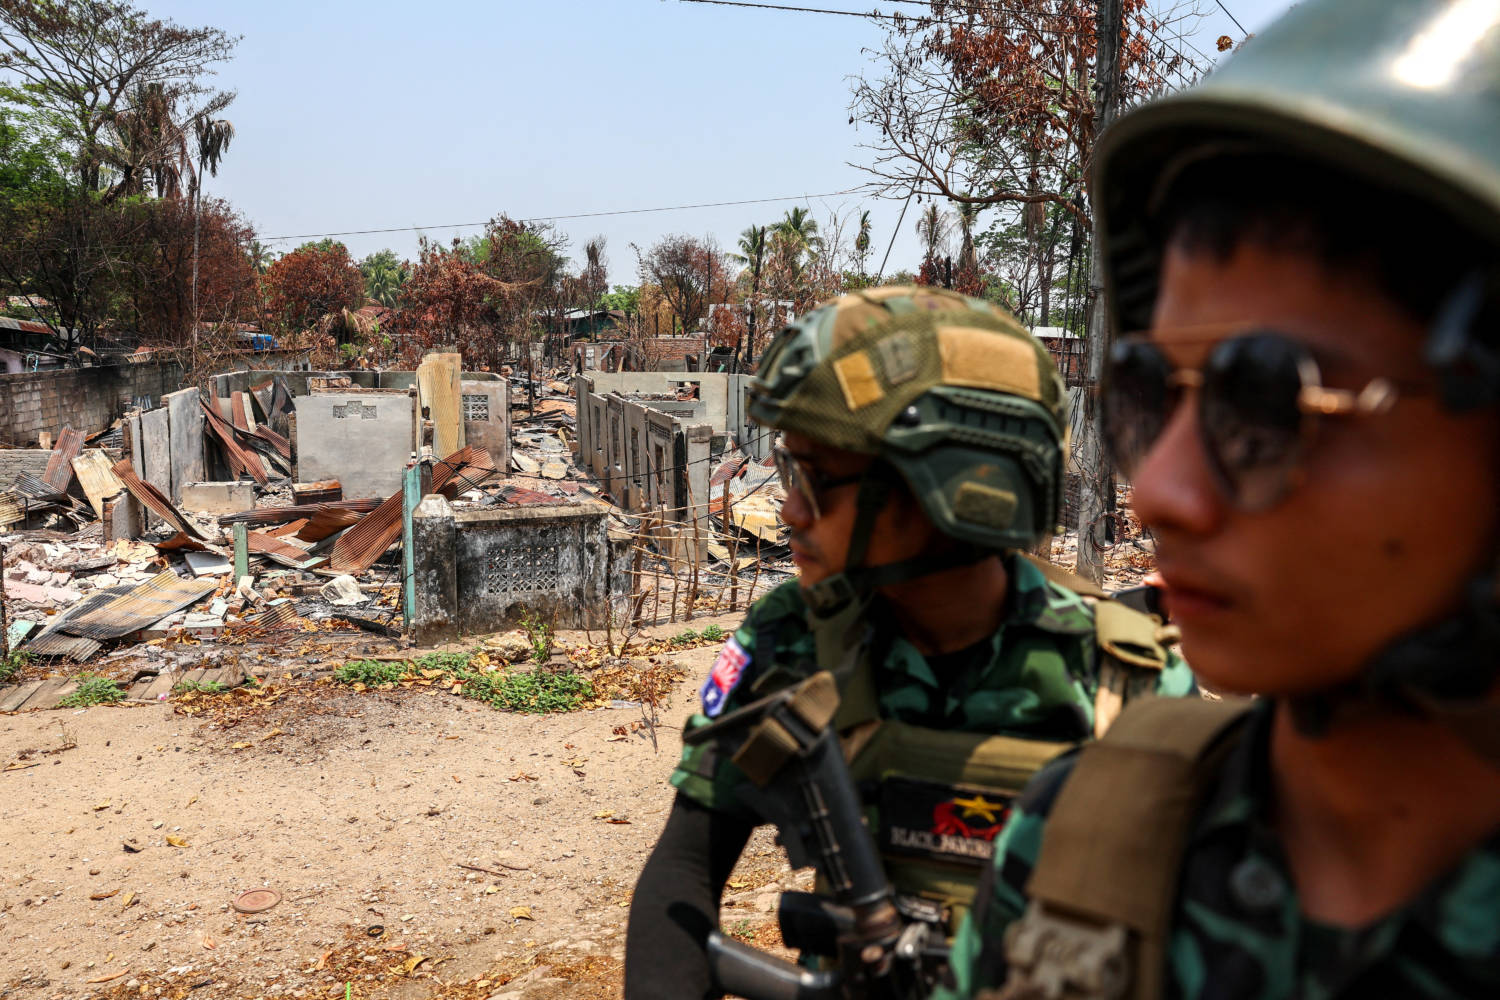 File Photo: Soldiers From The Karen National Liberation Army (knla) Patrol , Next To An Area Destroyed By Myanmar's Airstrike In Myawaddy, The Thailand Myanmar Border Town Under The Control Of A Coalition Of Rebel Forces Led By The Karen National Union